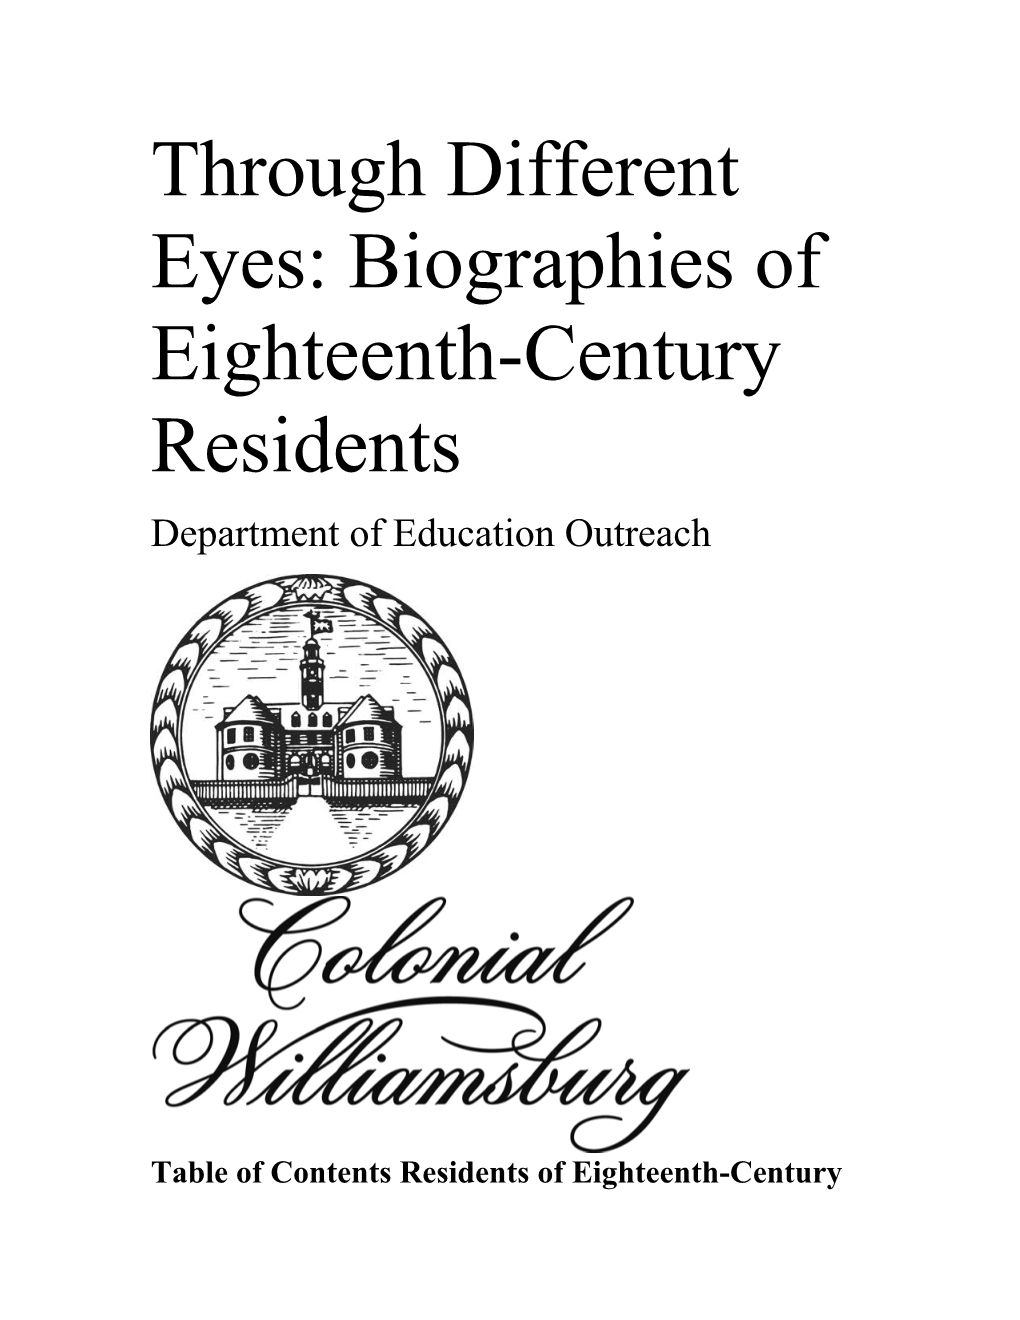 Through Different Eyes: Biographies of Eighteenth-Century Residents